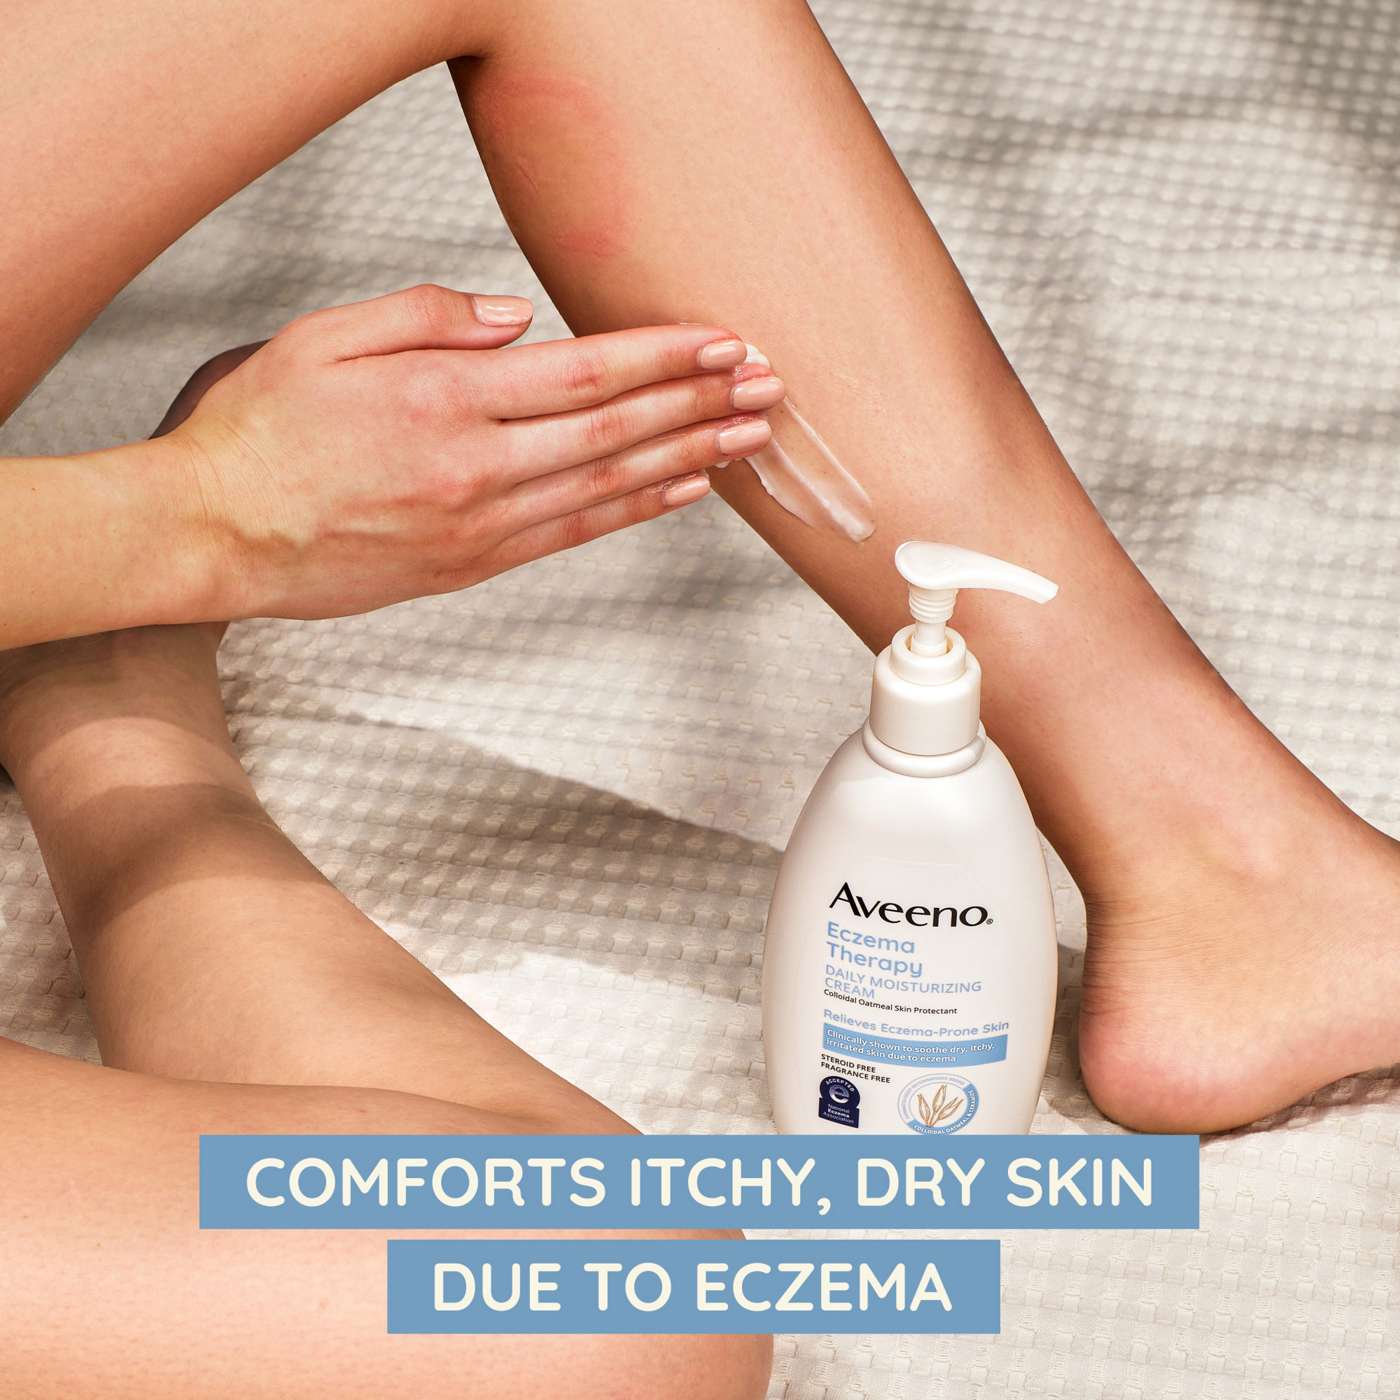 Aveeno Eczema Therapy Nighttime Itch Relief Balm; image 3 of 3